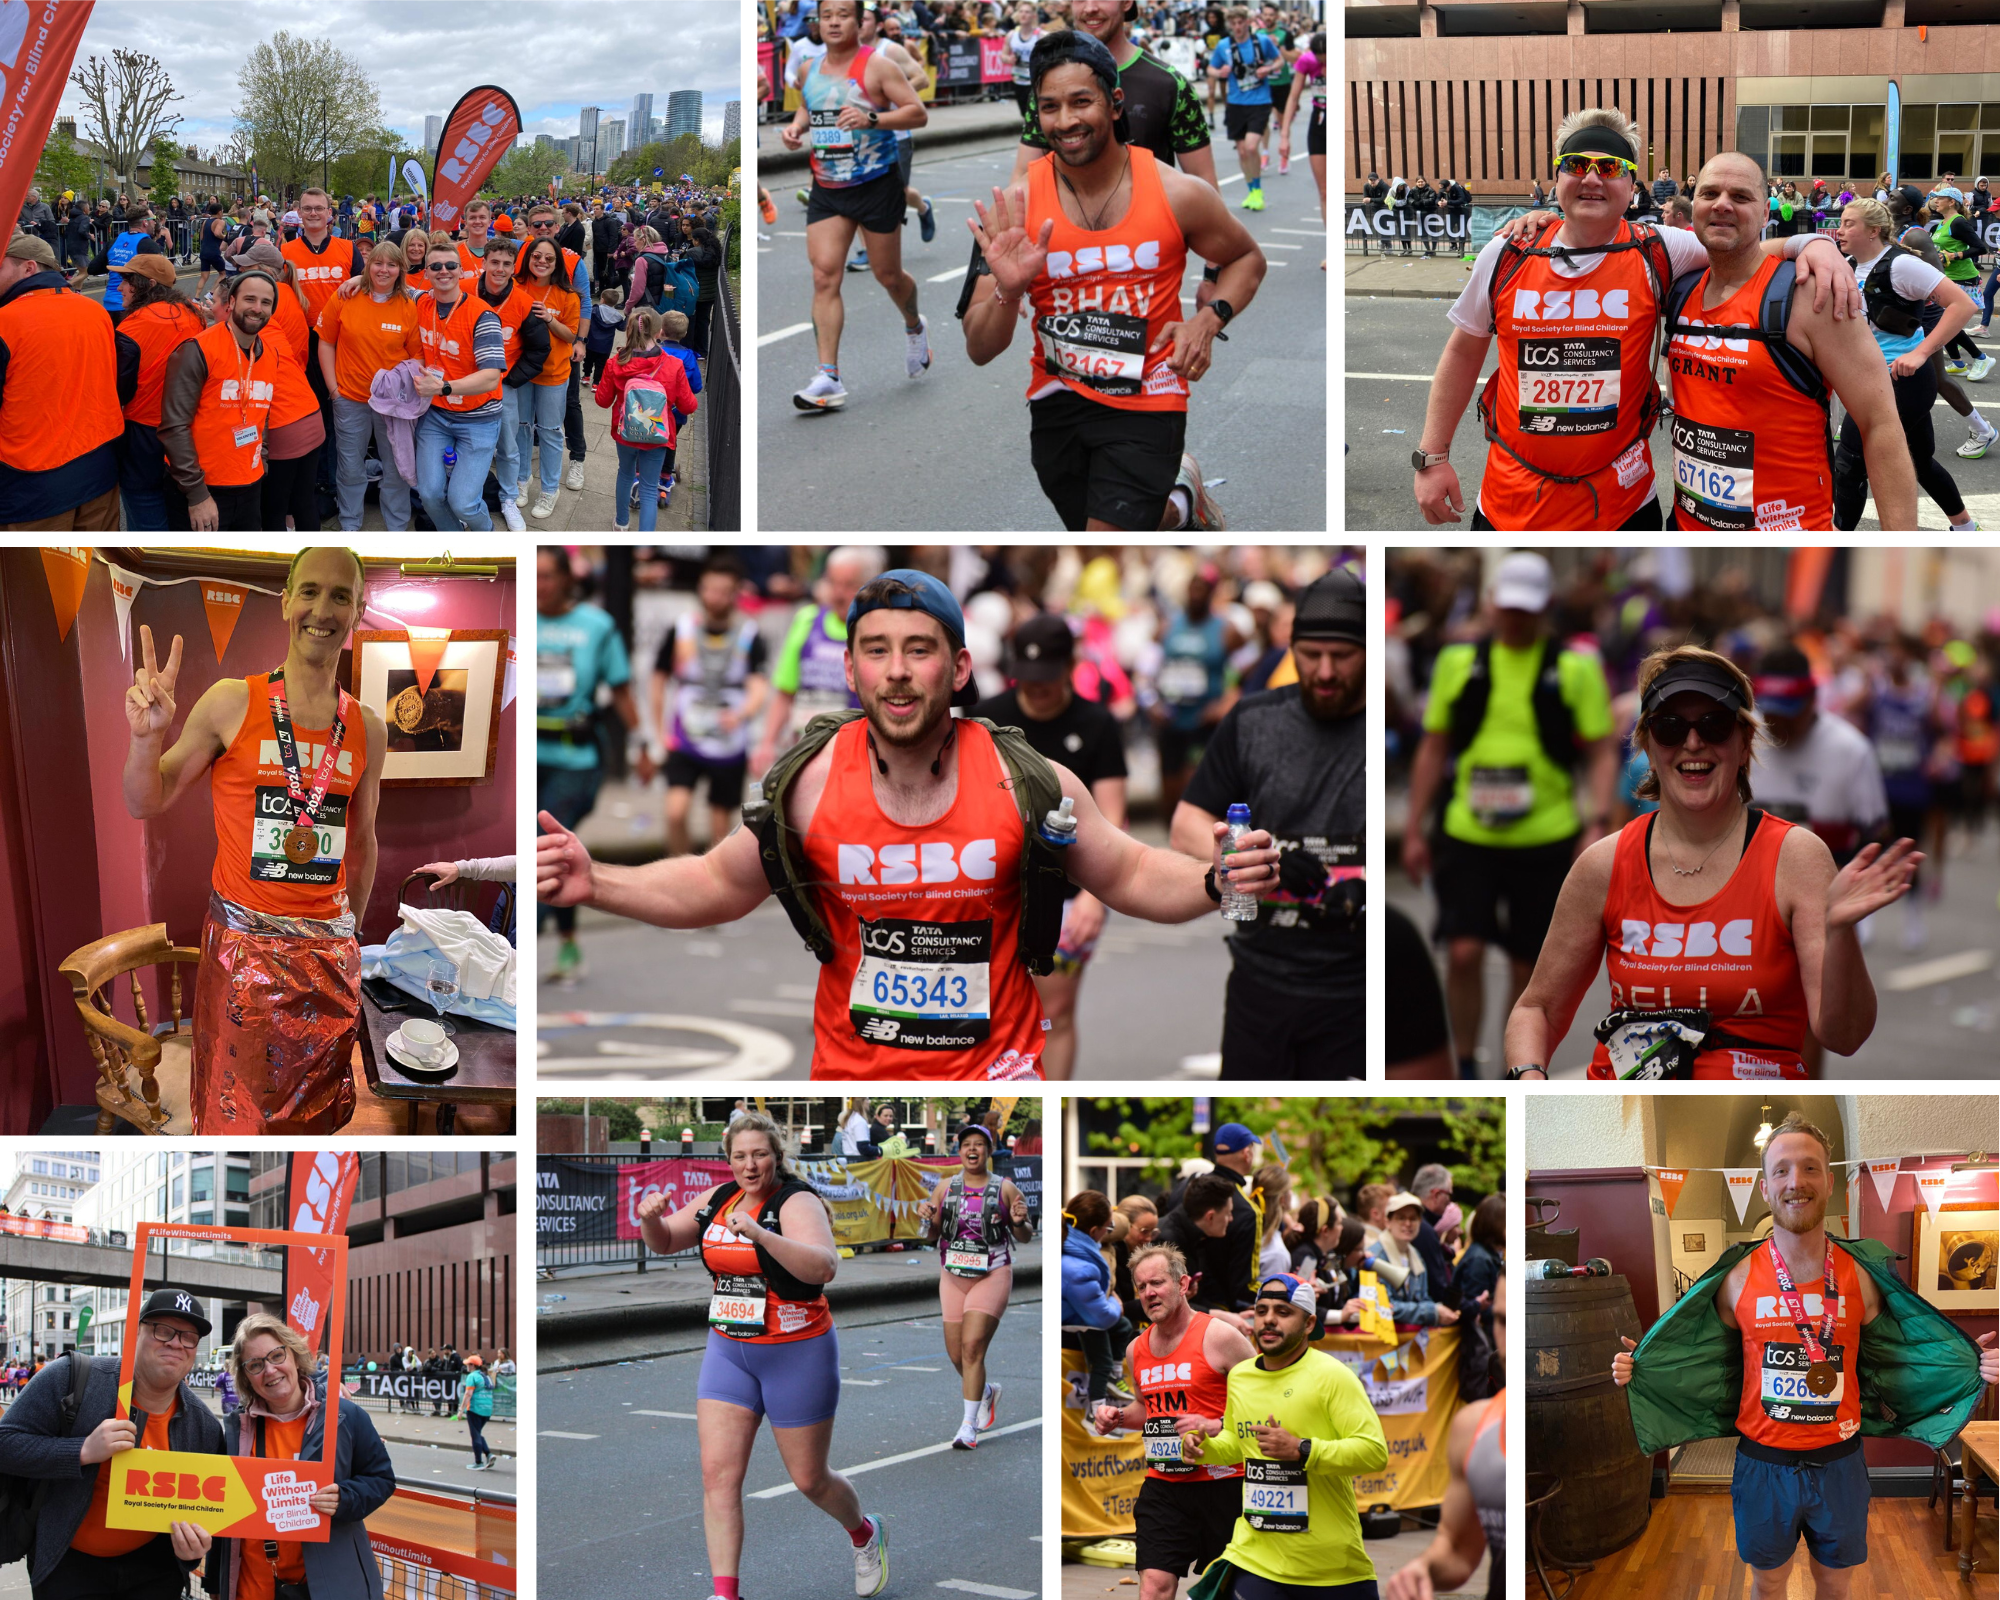 A photo album of 10 images from the London Marathon. The photos are group shots of volunteers, runners on the street of London, runners with a Selfie frame and runners posing with their medals.